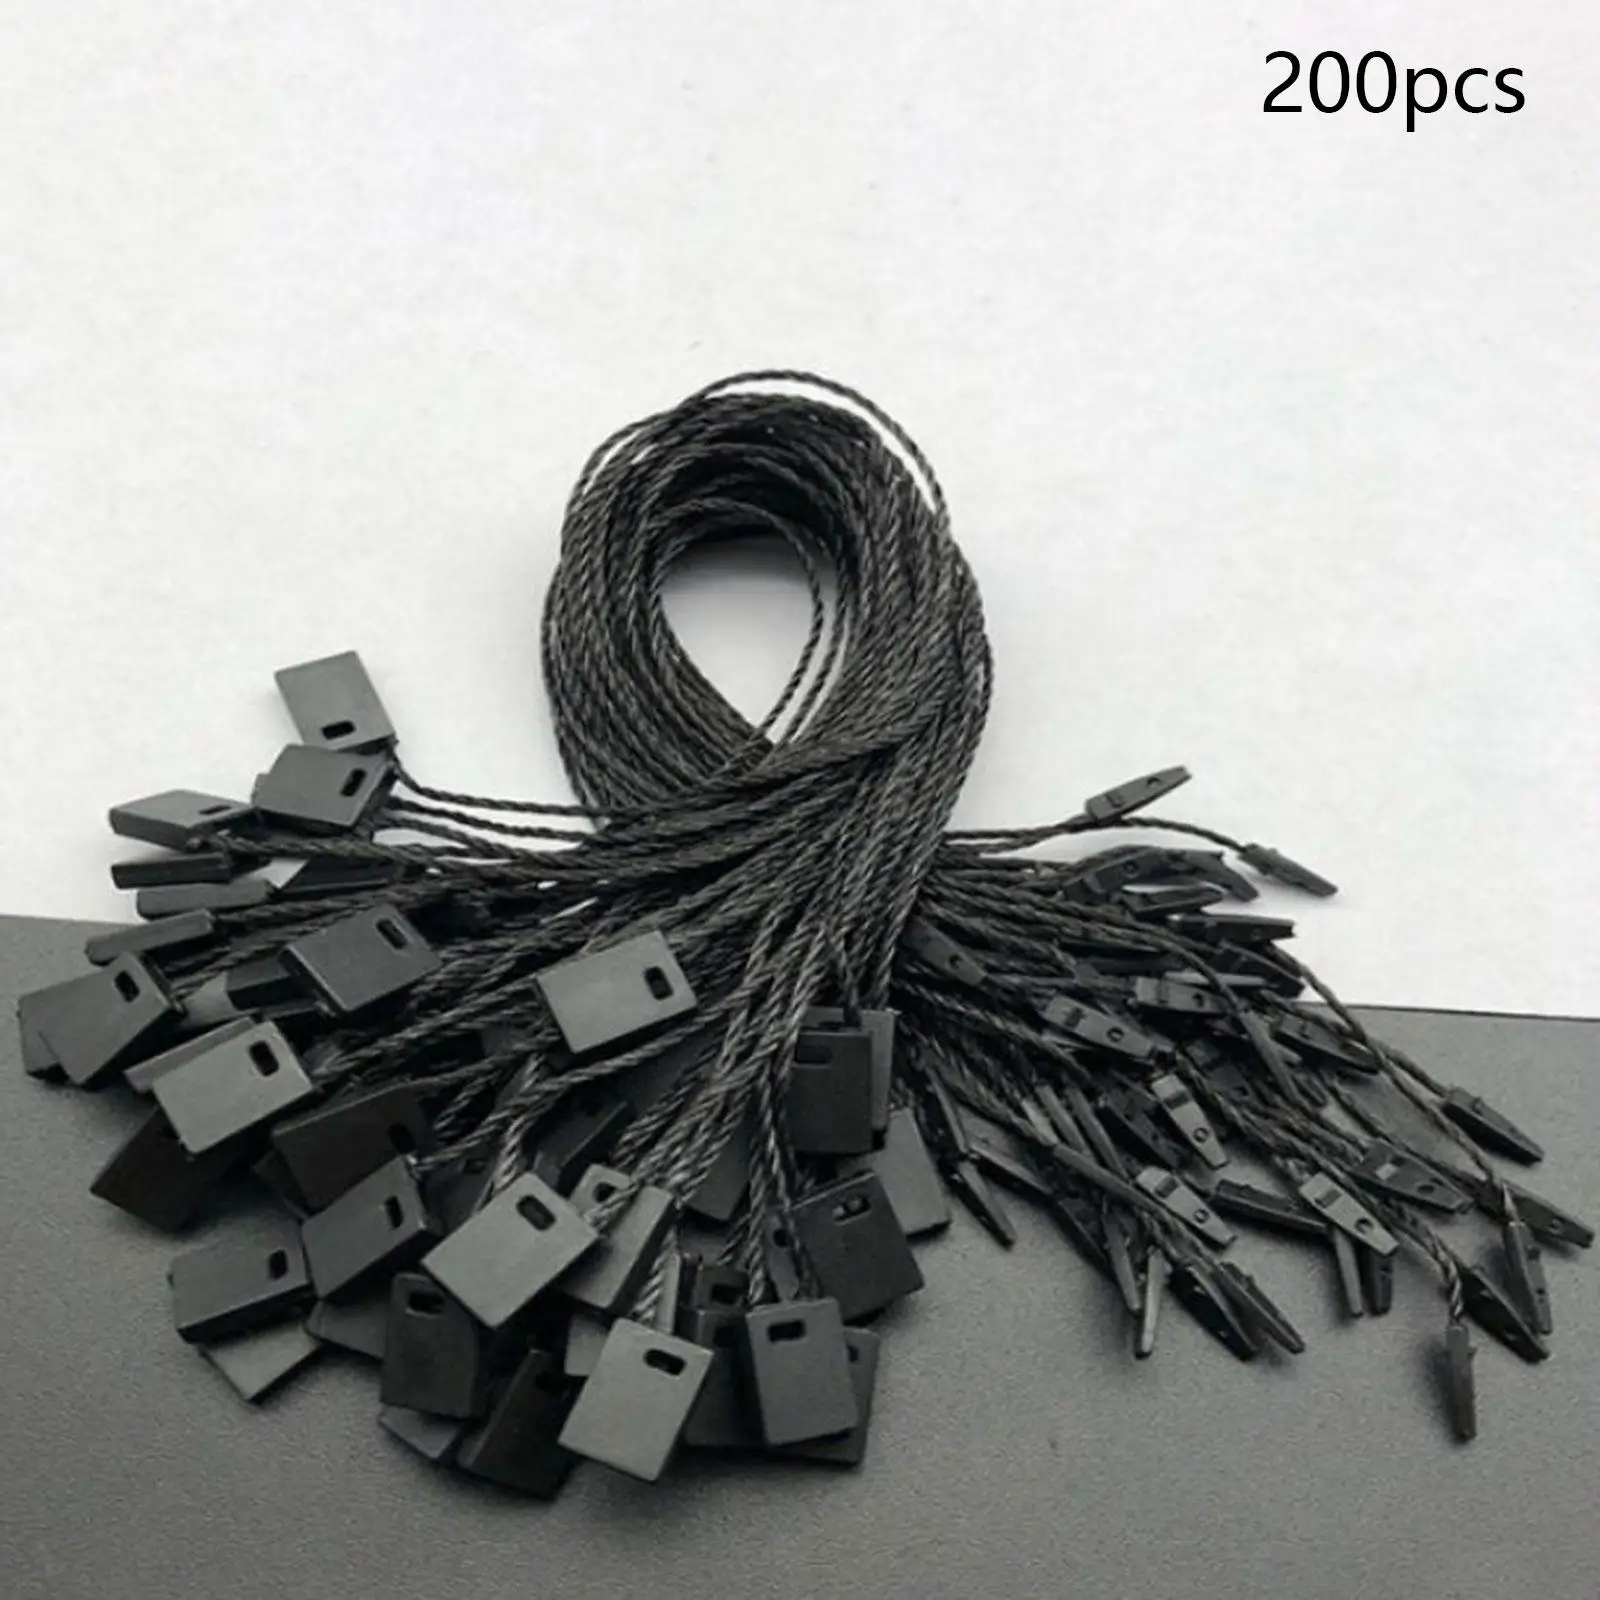 200Pcs Hang Tag Strings Easy to Attach Lightweight Craft Making DIY Tag Hanging Ropes for Gift Bags Luggage Jewelry Belt Purse